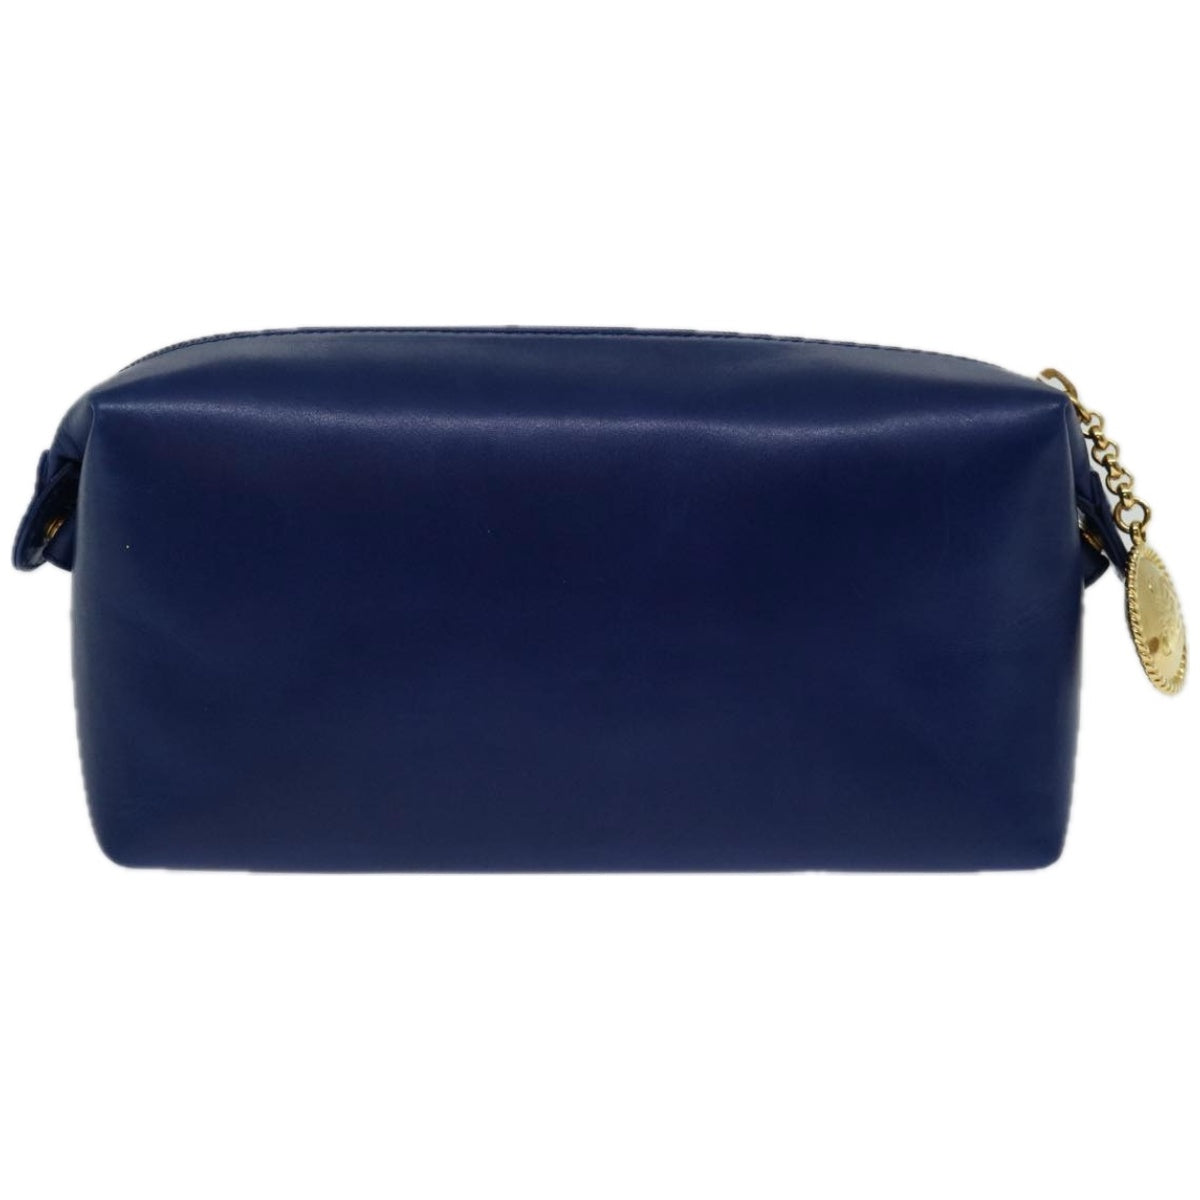 LOEWE Pouch Leather Blue Auth 67125 - 0